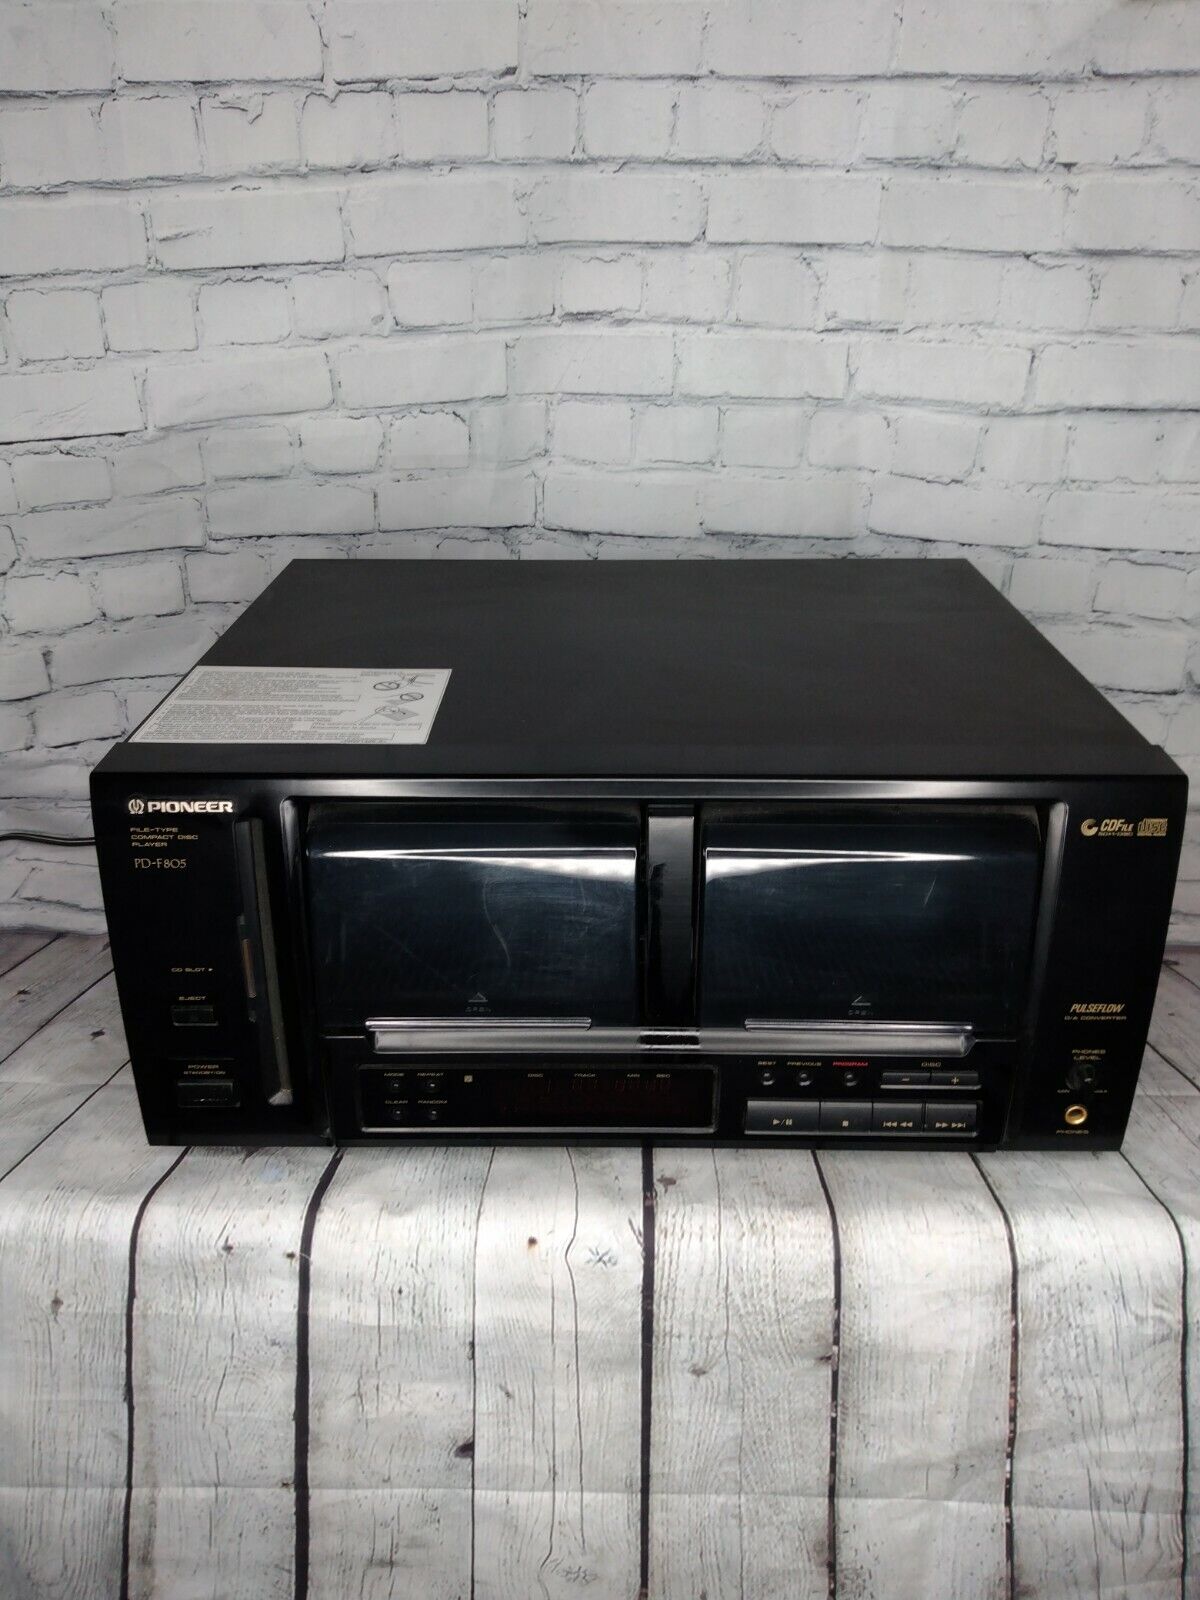 Breathing expand rim PIONEER PD-F805 CD PLAYER 50+1 CD Works Great | eBay